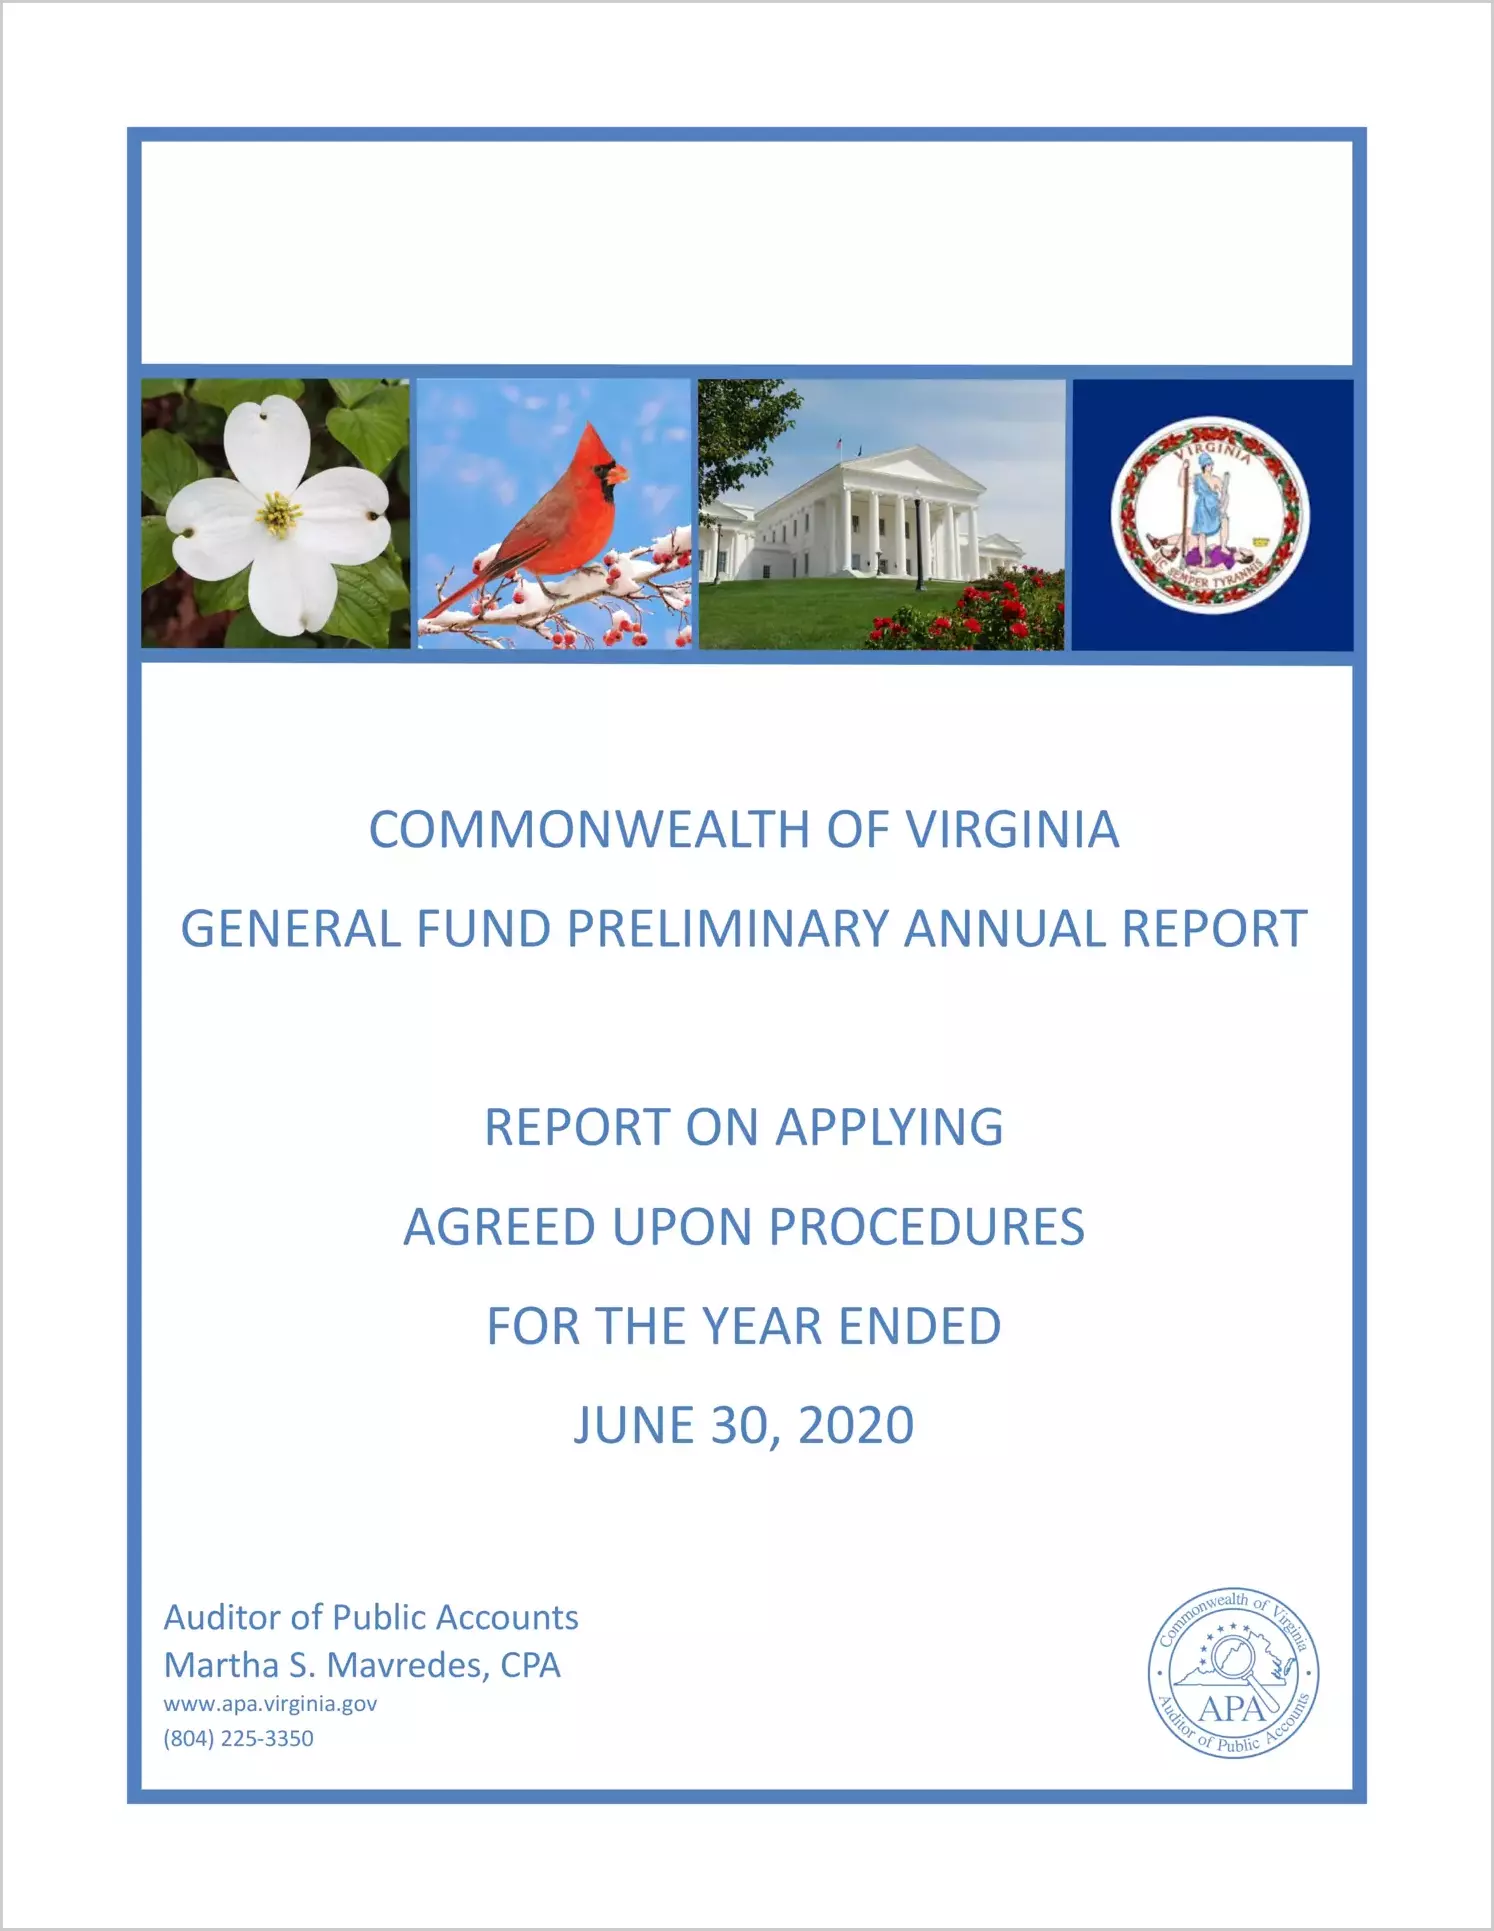 Commonwealth of Virginia General Fund Preliminary Annual Report for the year ended June 30, 2020